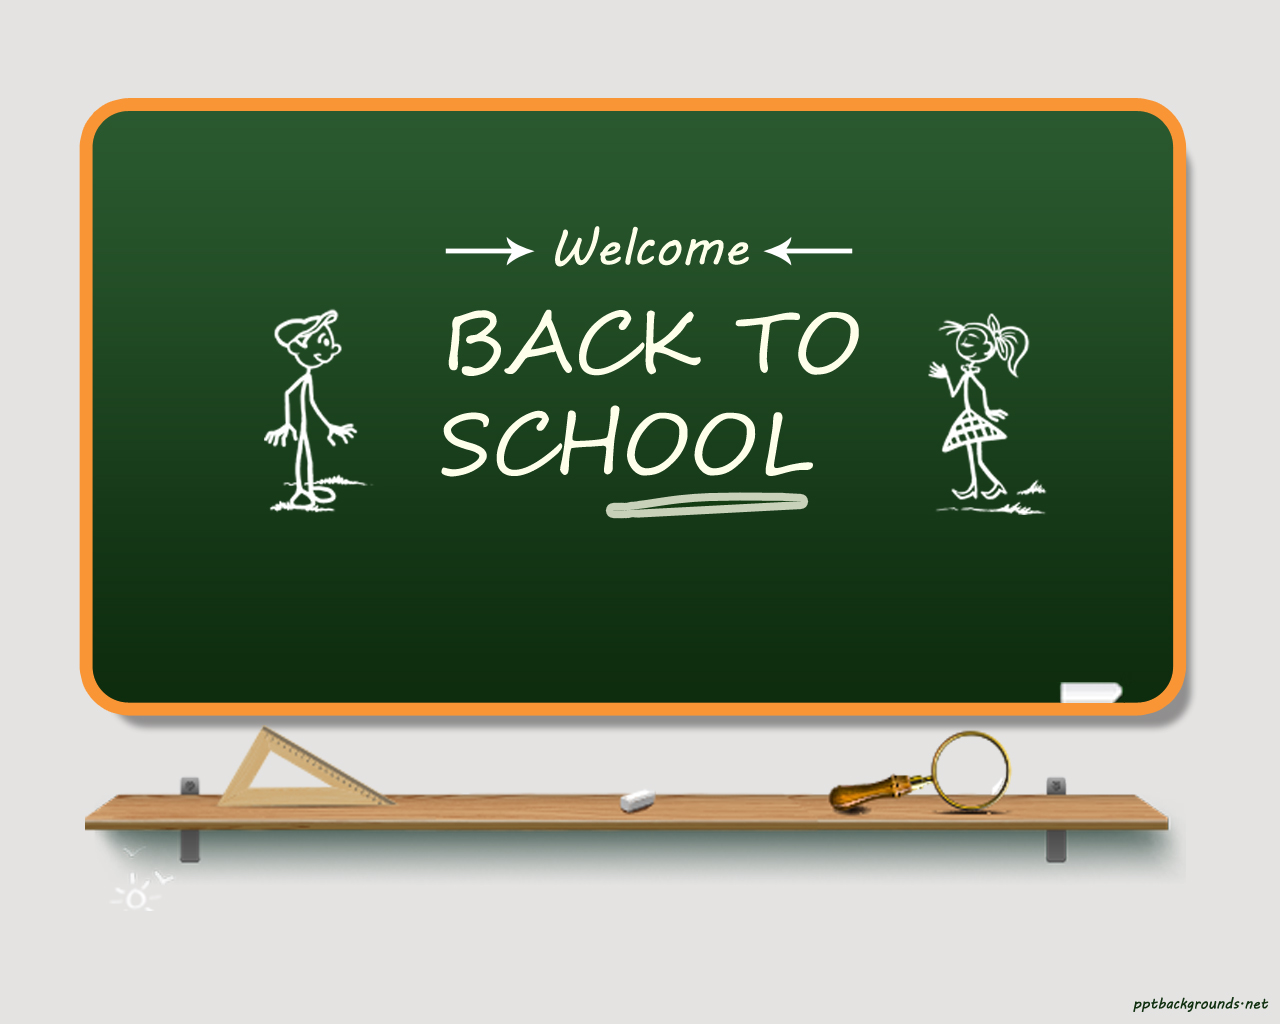 Back to School 2014 - 2015 powerpoint background